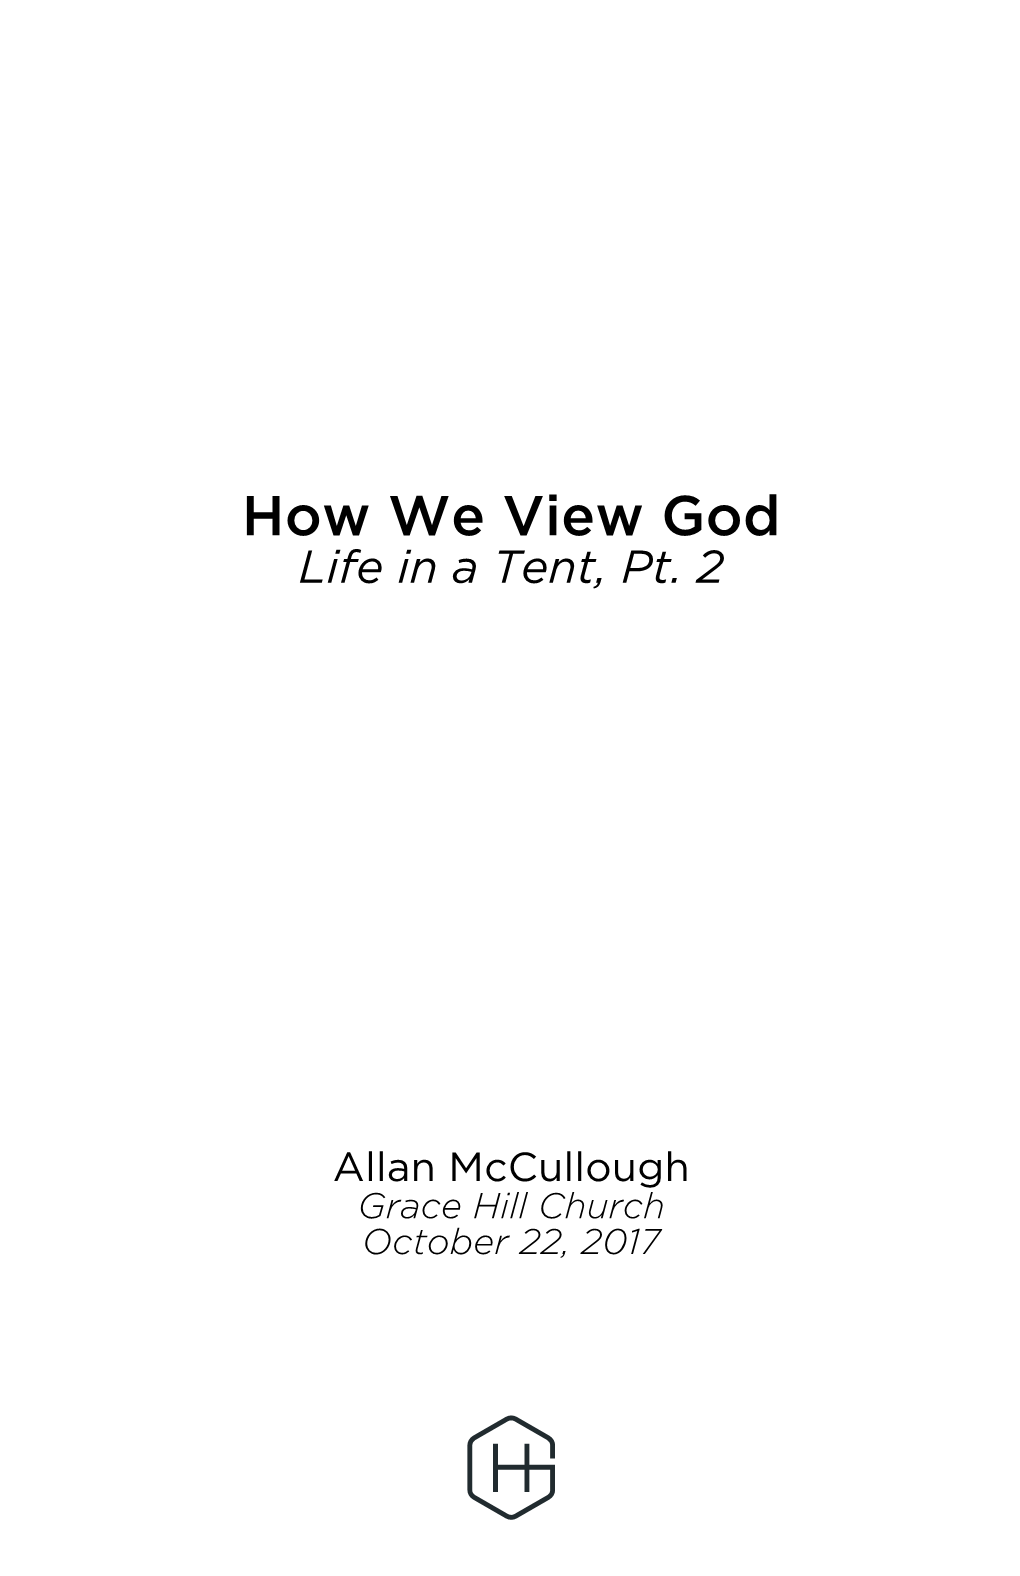 How We View God Life in a Tent, Pt